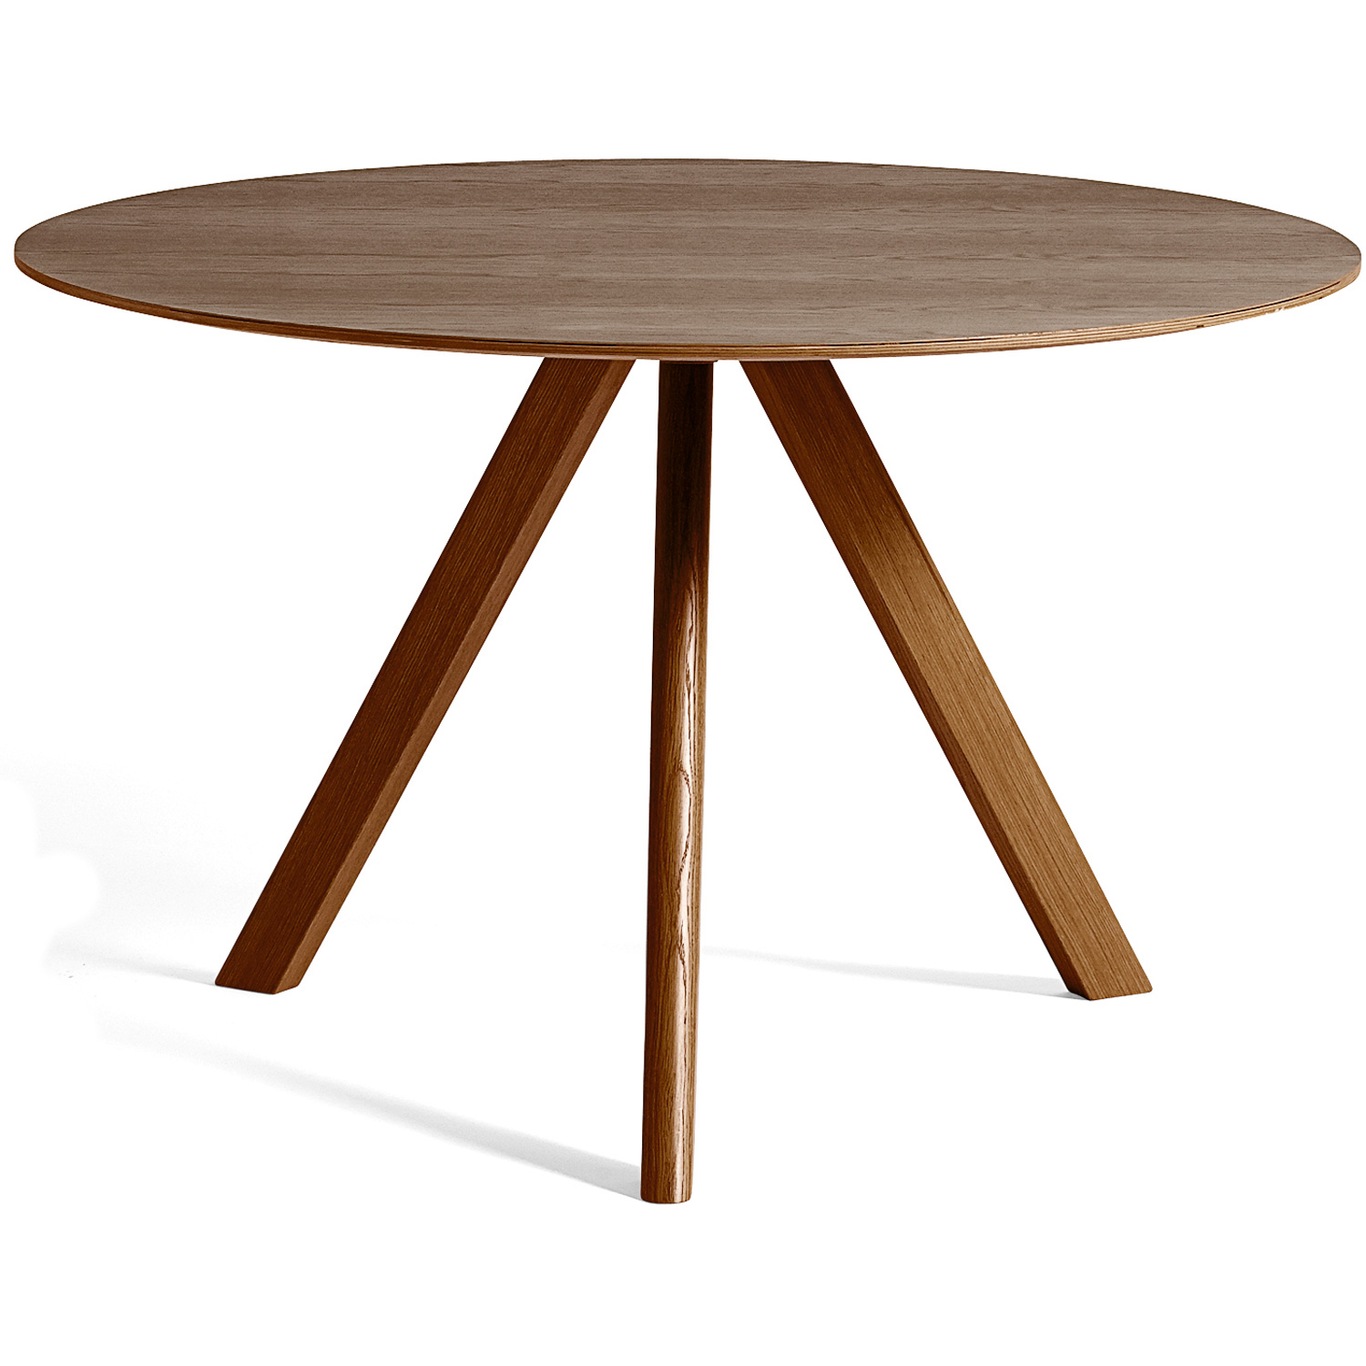 CPH 20 Table Ø120x74 cm, Water based lacquered Walnut